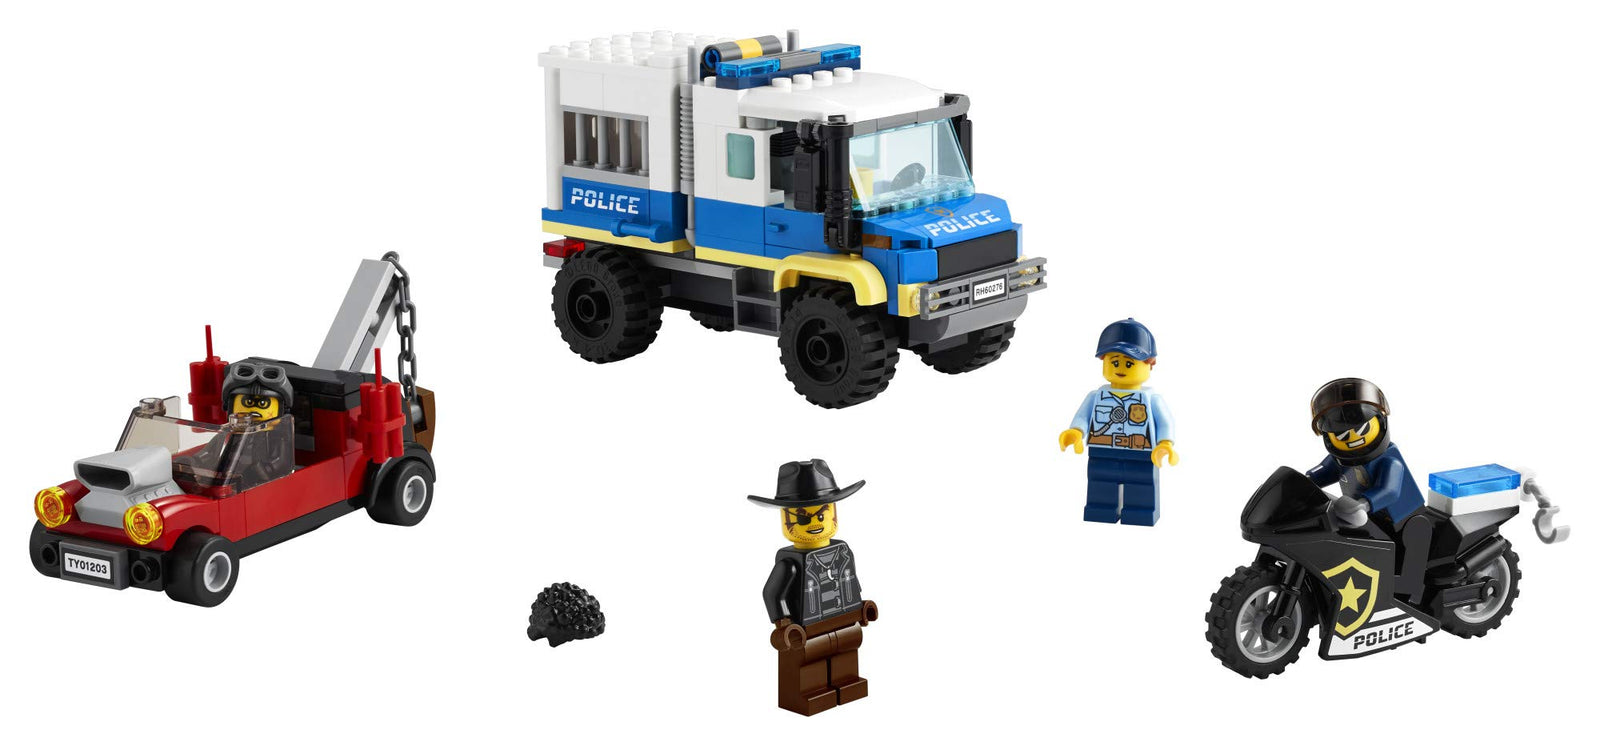 LEGO City Police Prisoner Transport 60276 Building Kit; Cool Police Toy for Kids, New 2021 (244 Pieces)